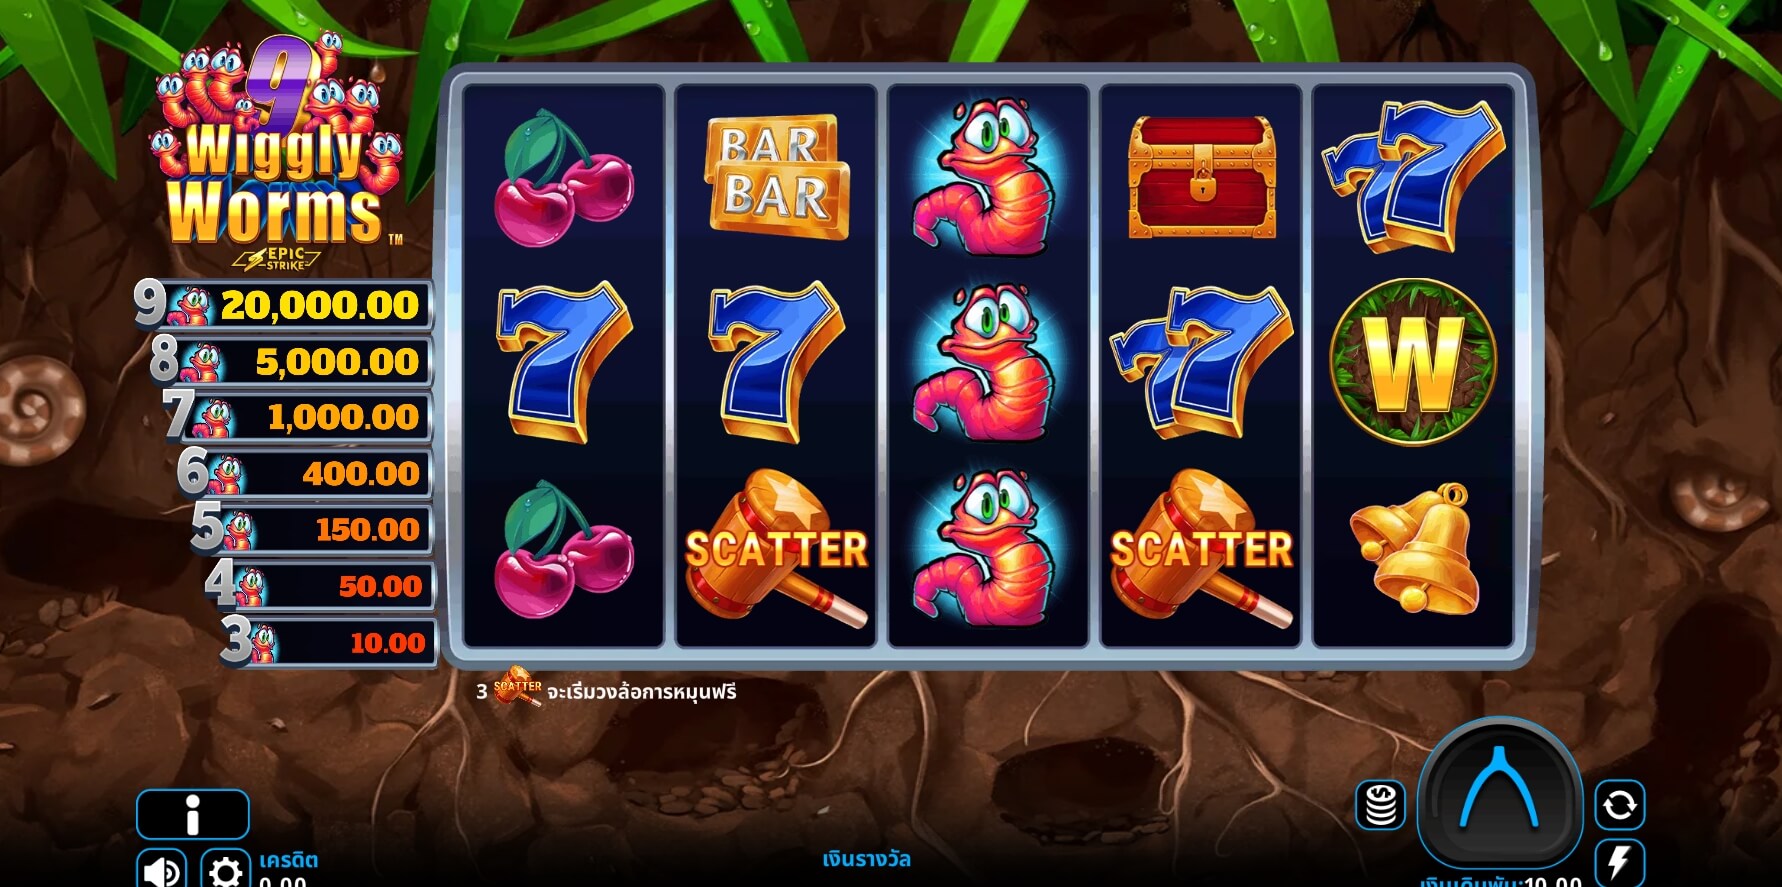 9 Wiggly Worms UPG Slot Slot PG